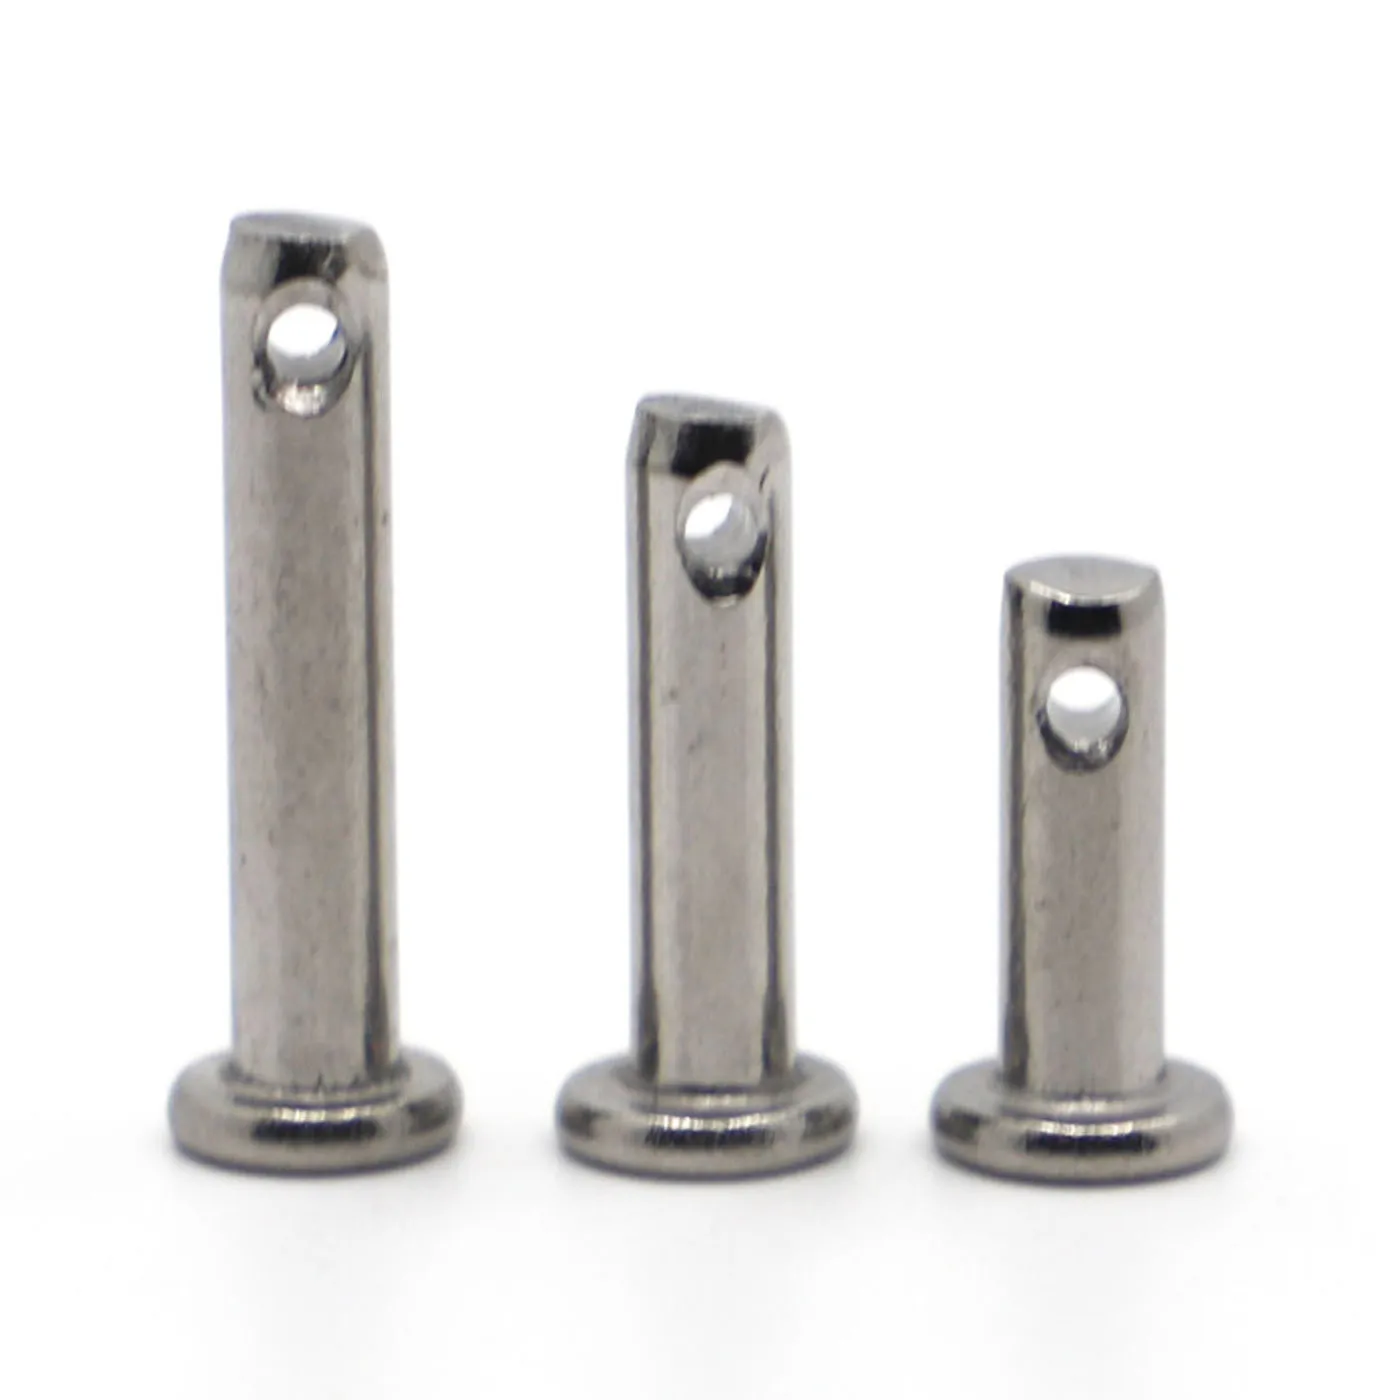 M3 M4 M5 M6 M8 M10 304 Stainless Steel Axis Pin Roll Flat Head Cylindrical Pin With Hole Locating Pins GB882